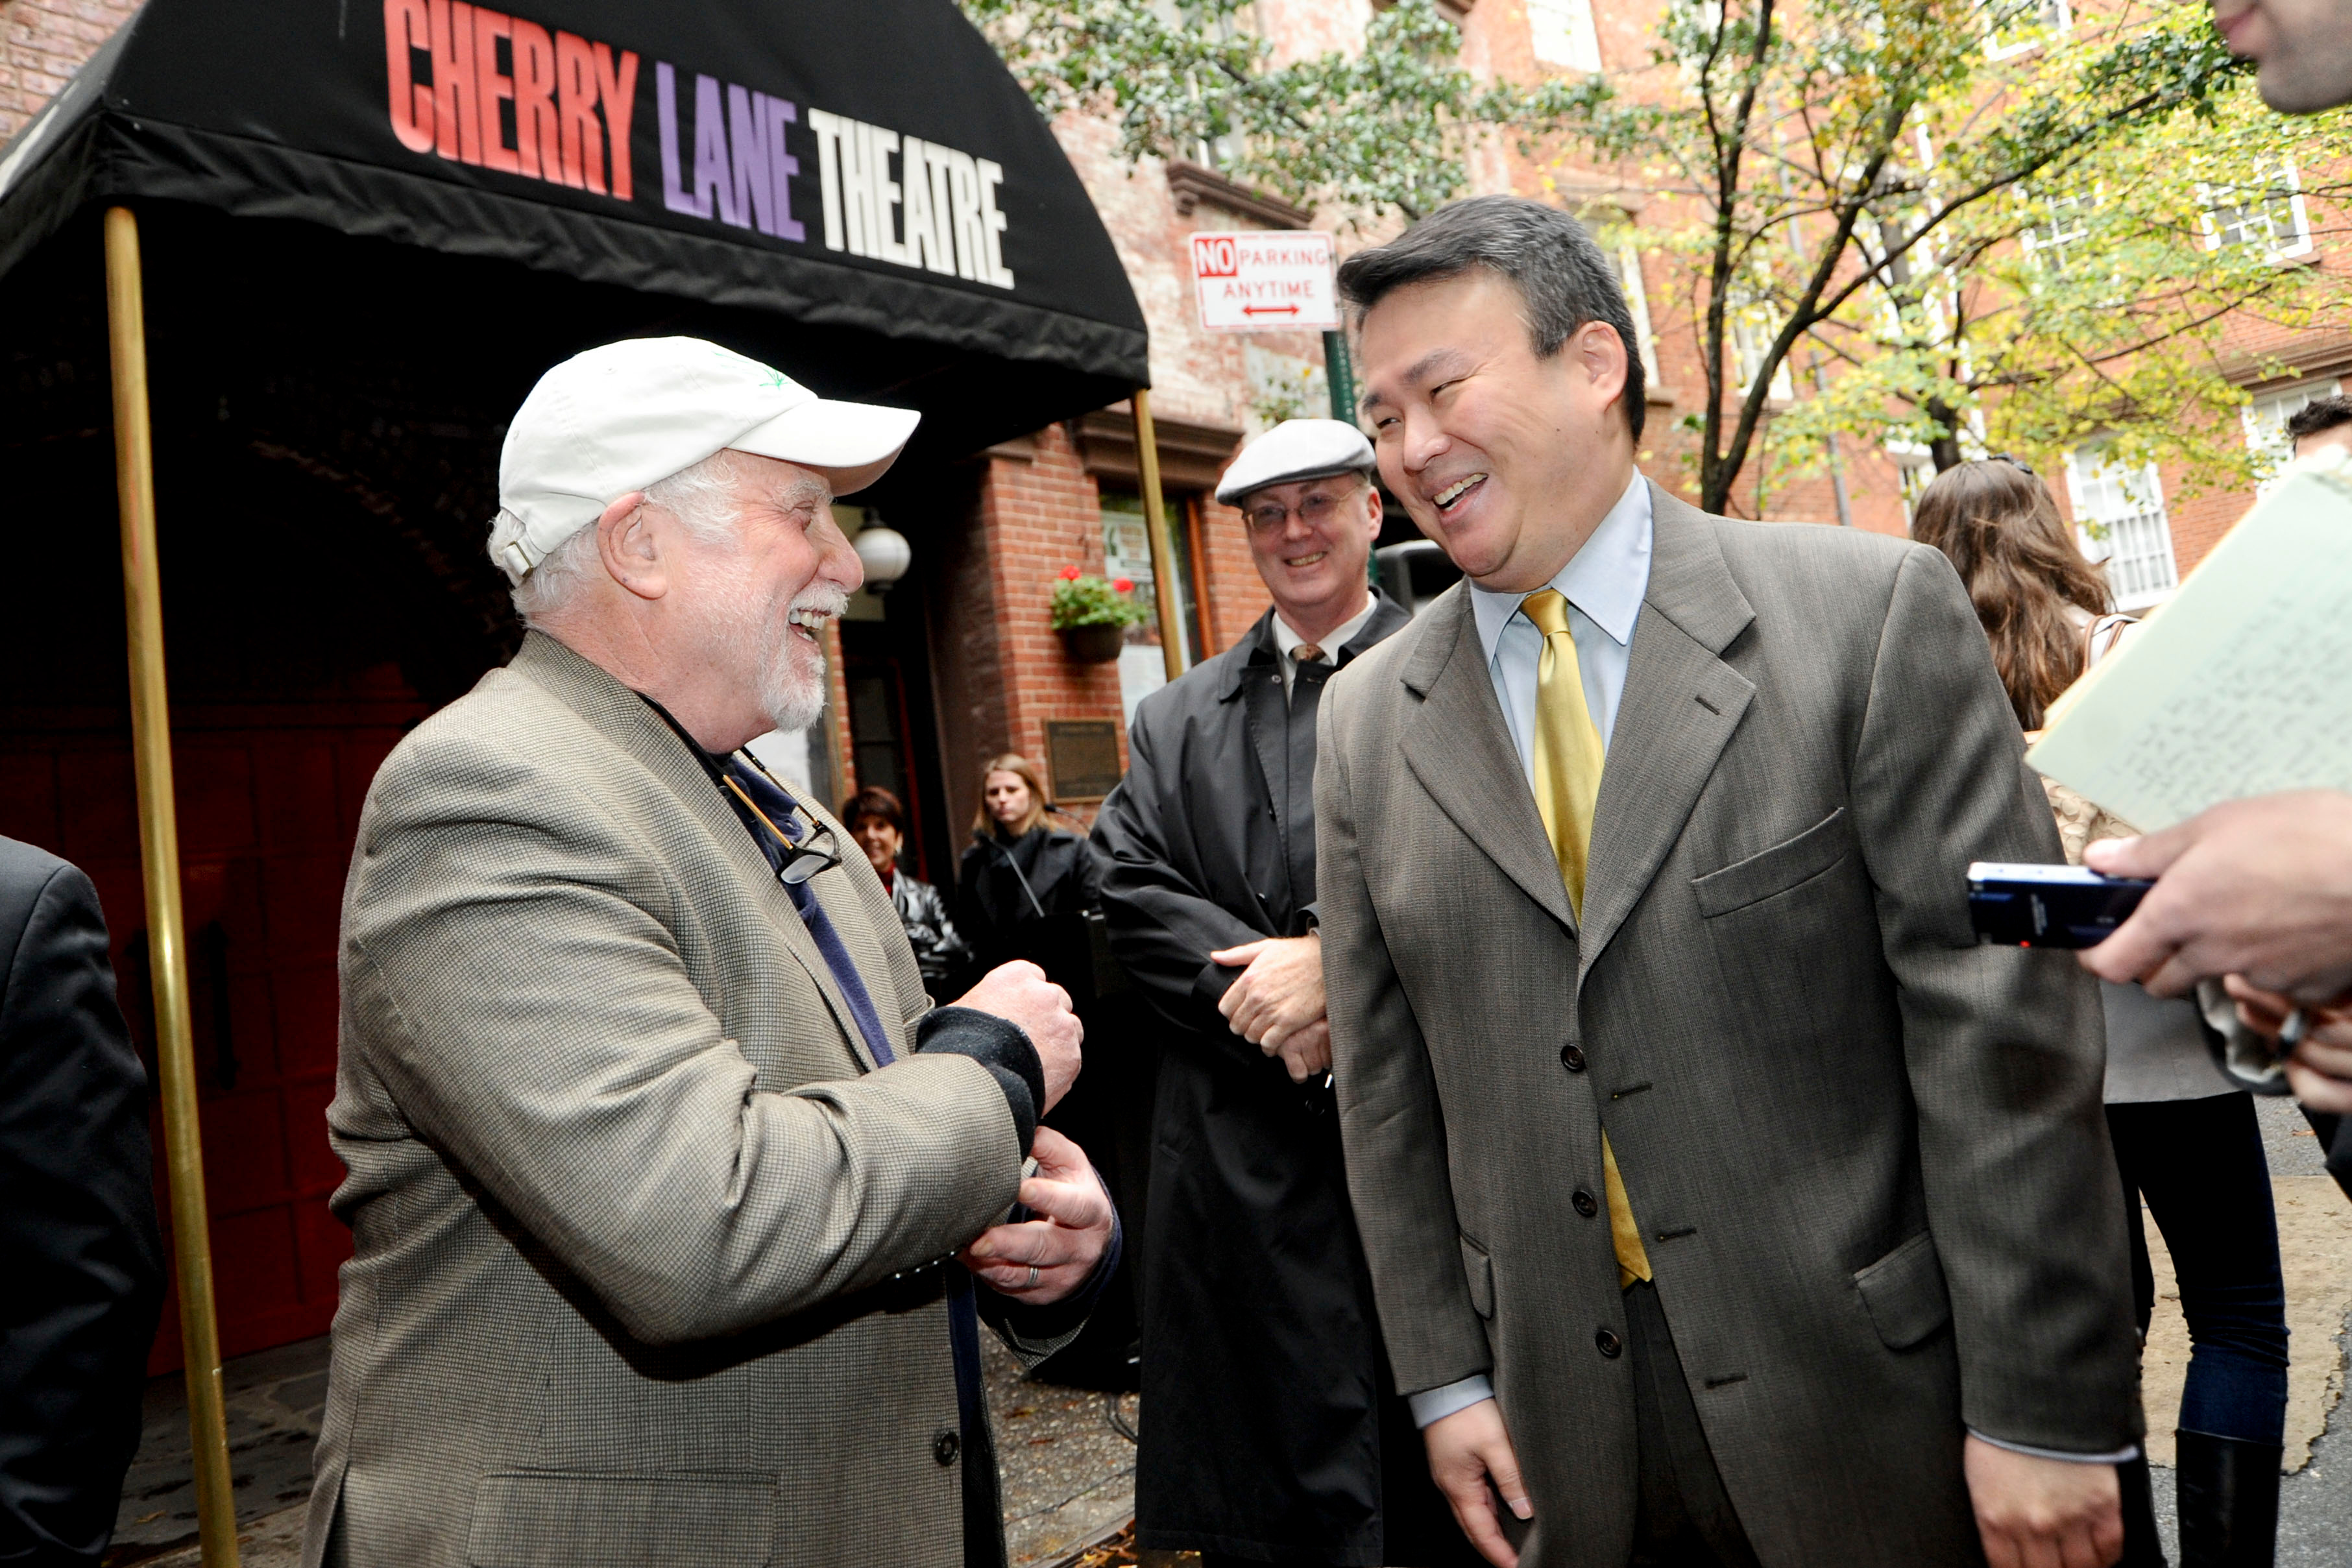 David W. Chien with Richard Dreyfuss at Ride of Fame (November 5th, 2010).